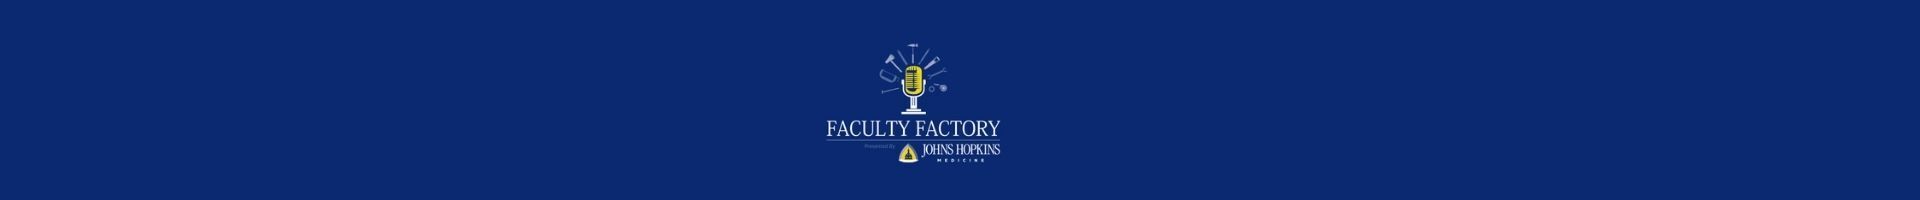 Faculty Factory